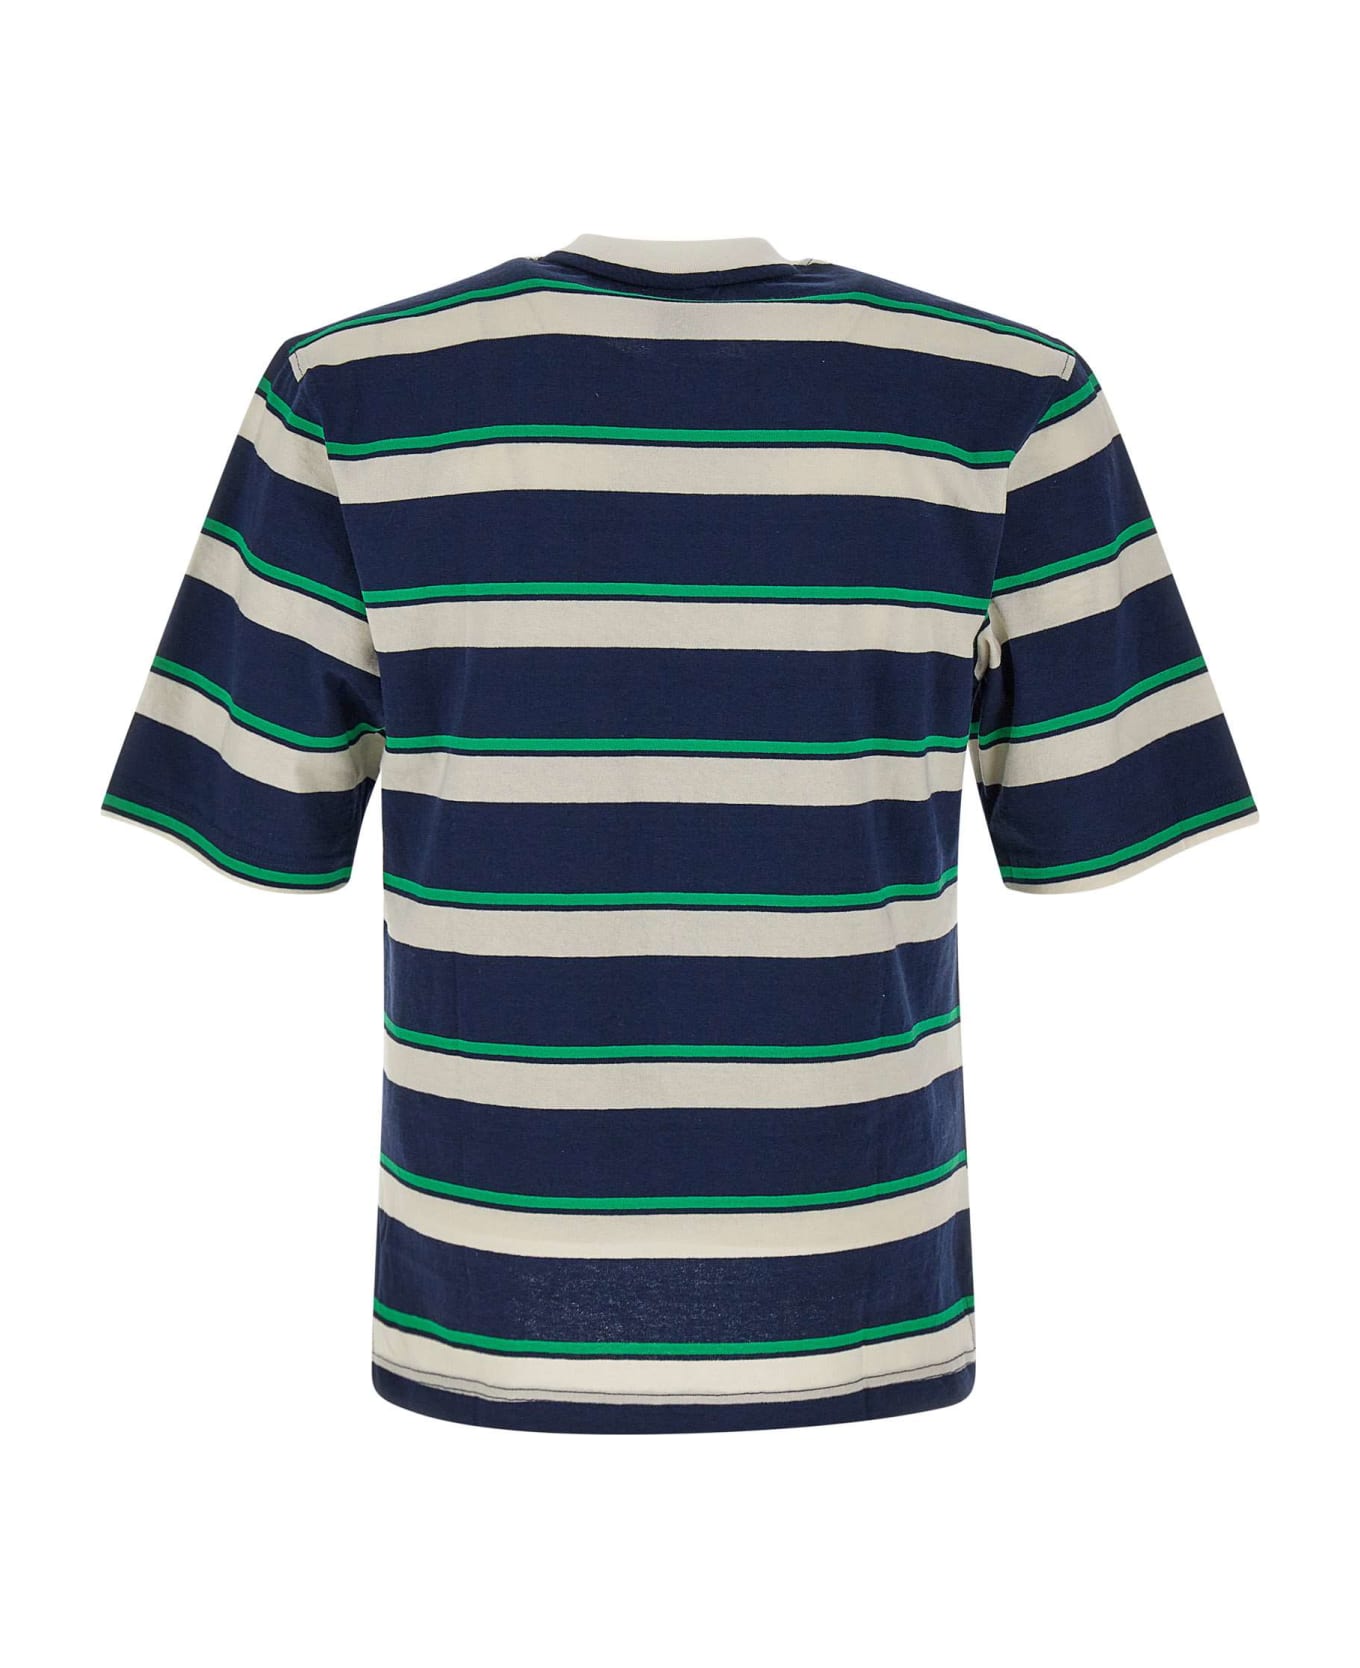 The North Face 'tnf Easy Tee' Cotton T-shirt - Optic emerald